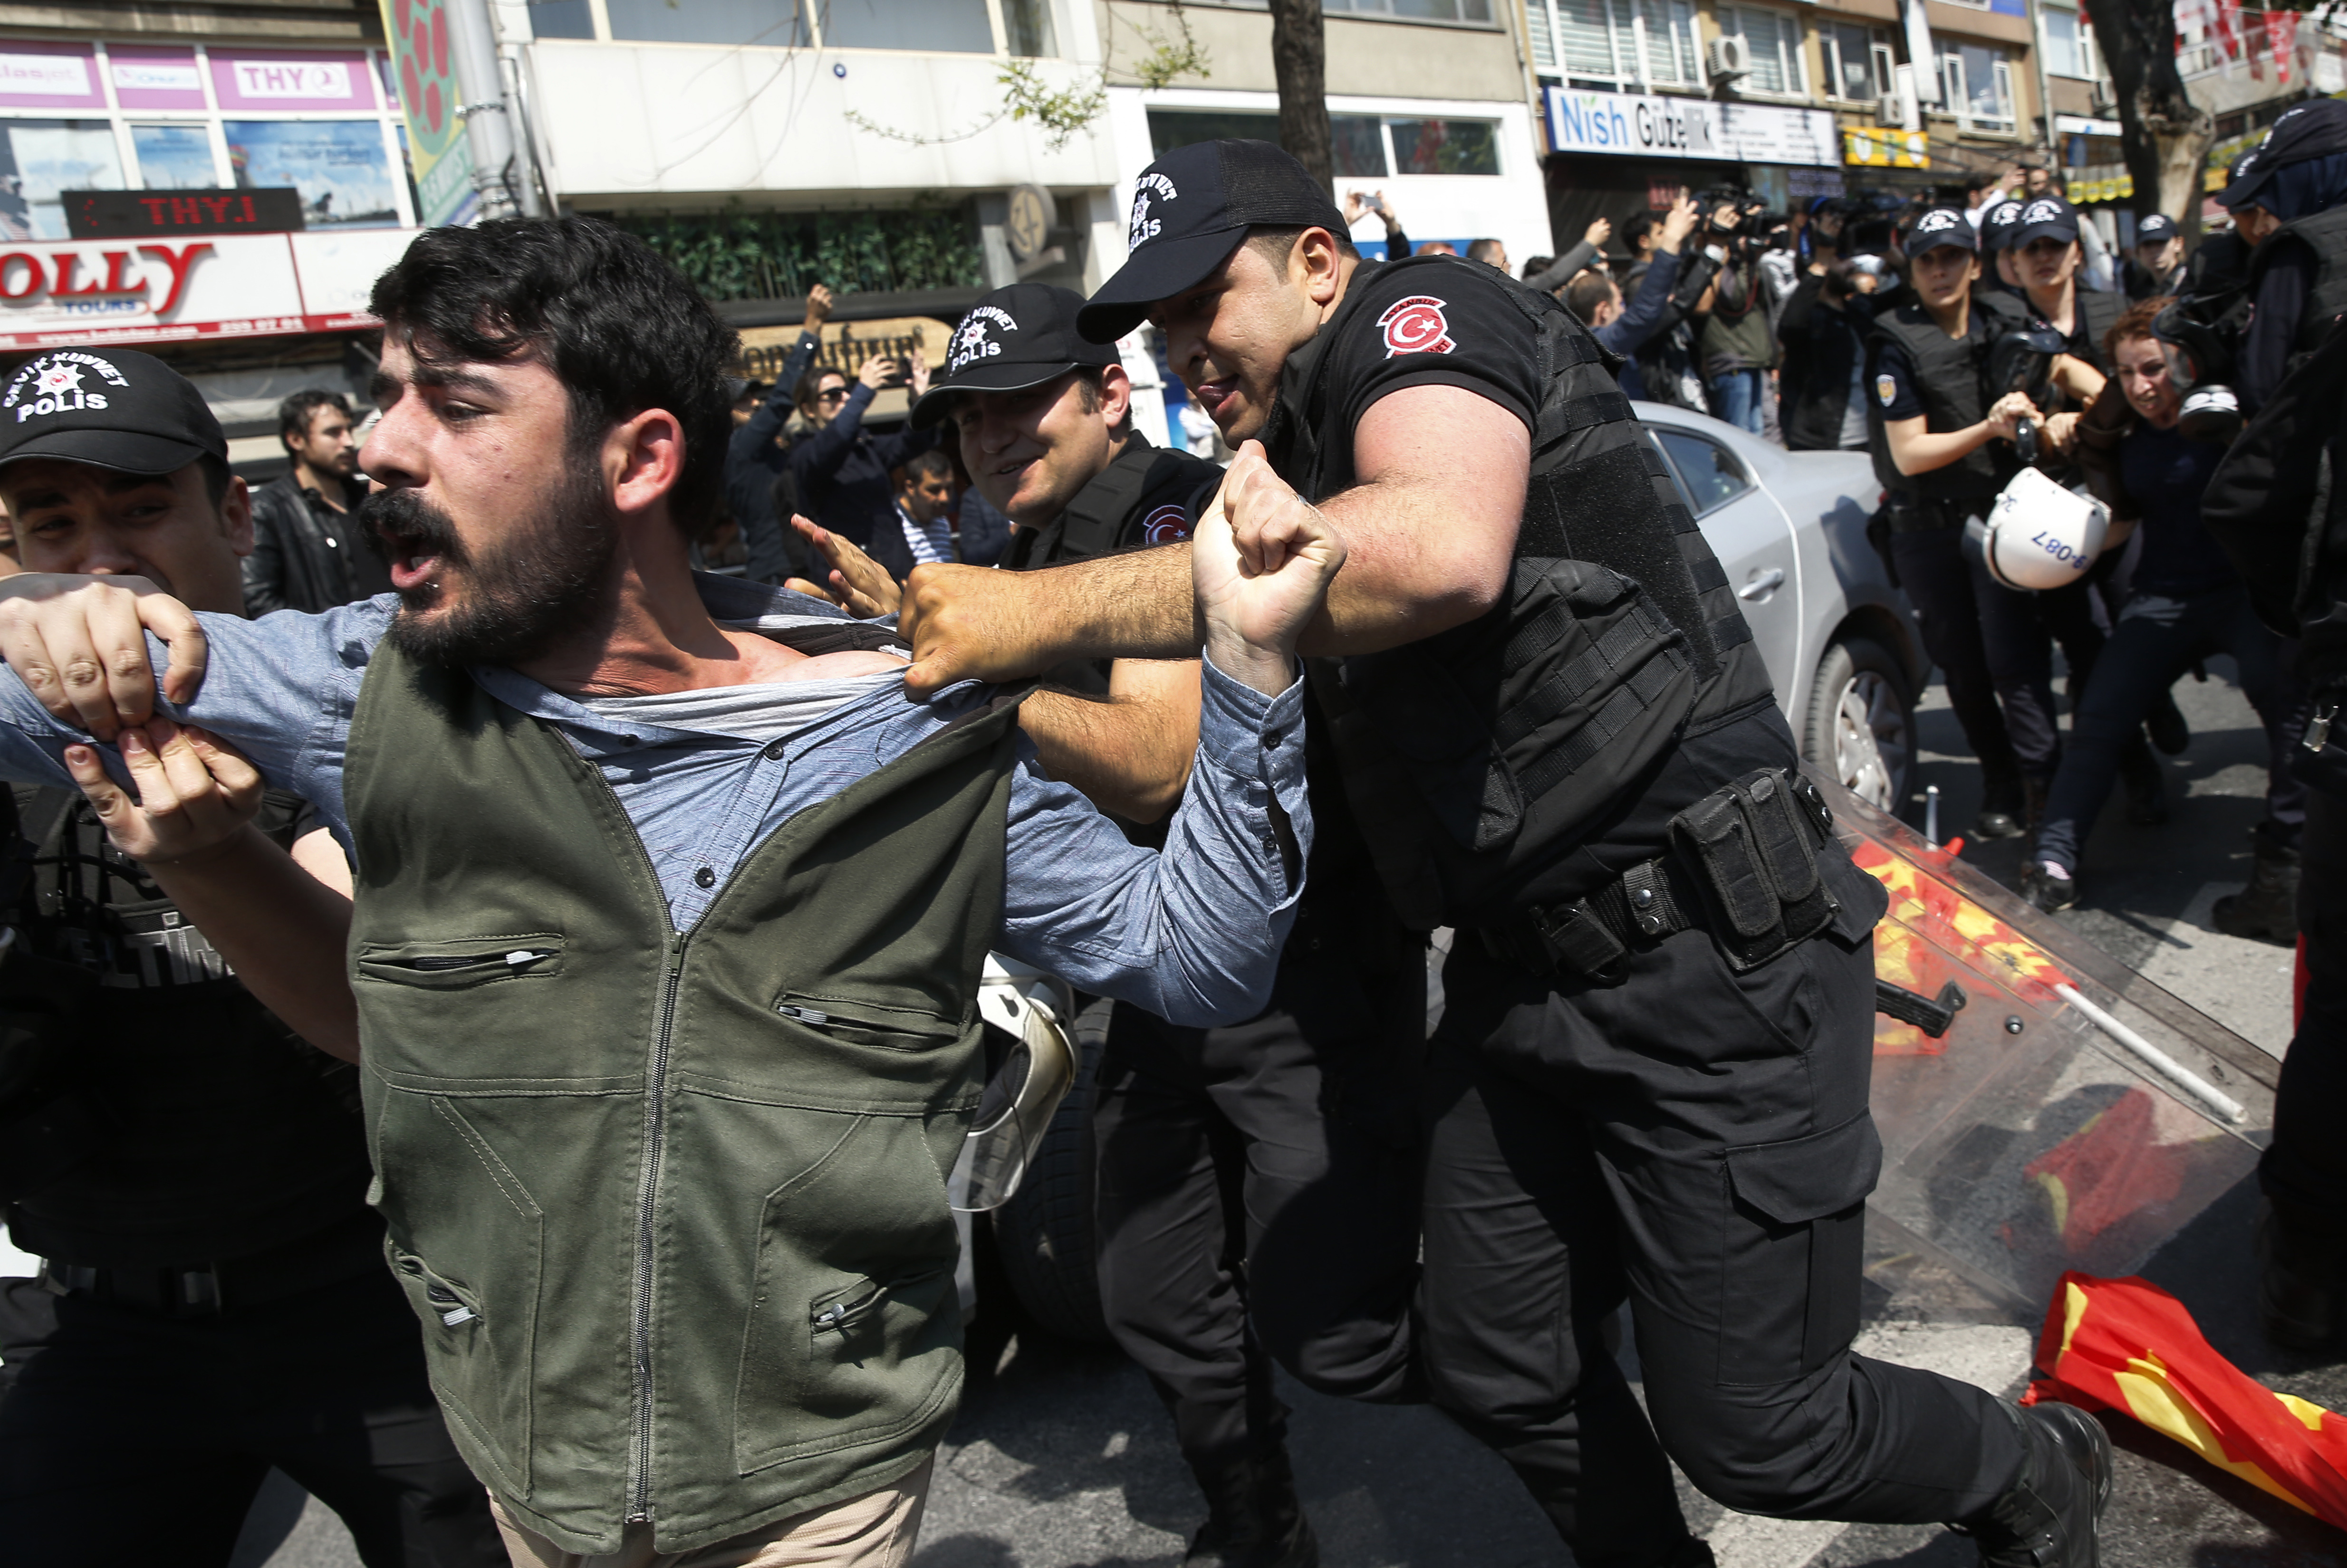 Police scuffle with demonstrators during May Day protests in Istanbul, Turkey, Tuesday, May 1, 2018. Police in Istanbul detained dozens of demonstrators who tried to march toward Istanbul's symbolic Taksim Square in defiance of a ban by the government, citing security concerns. (AP Photo/Lefteris Pitarakis)